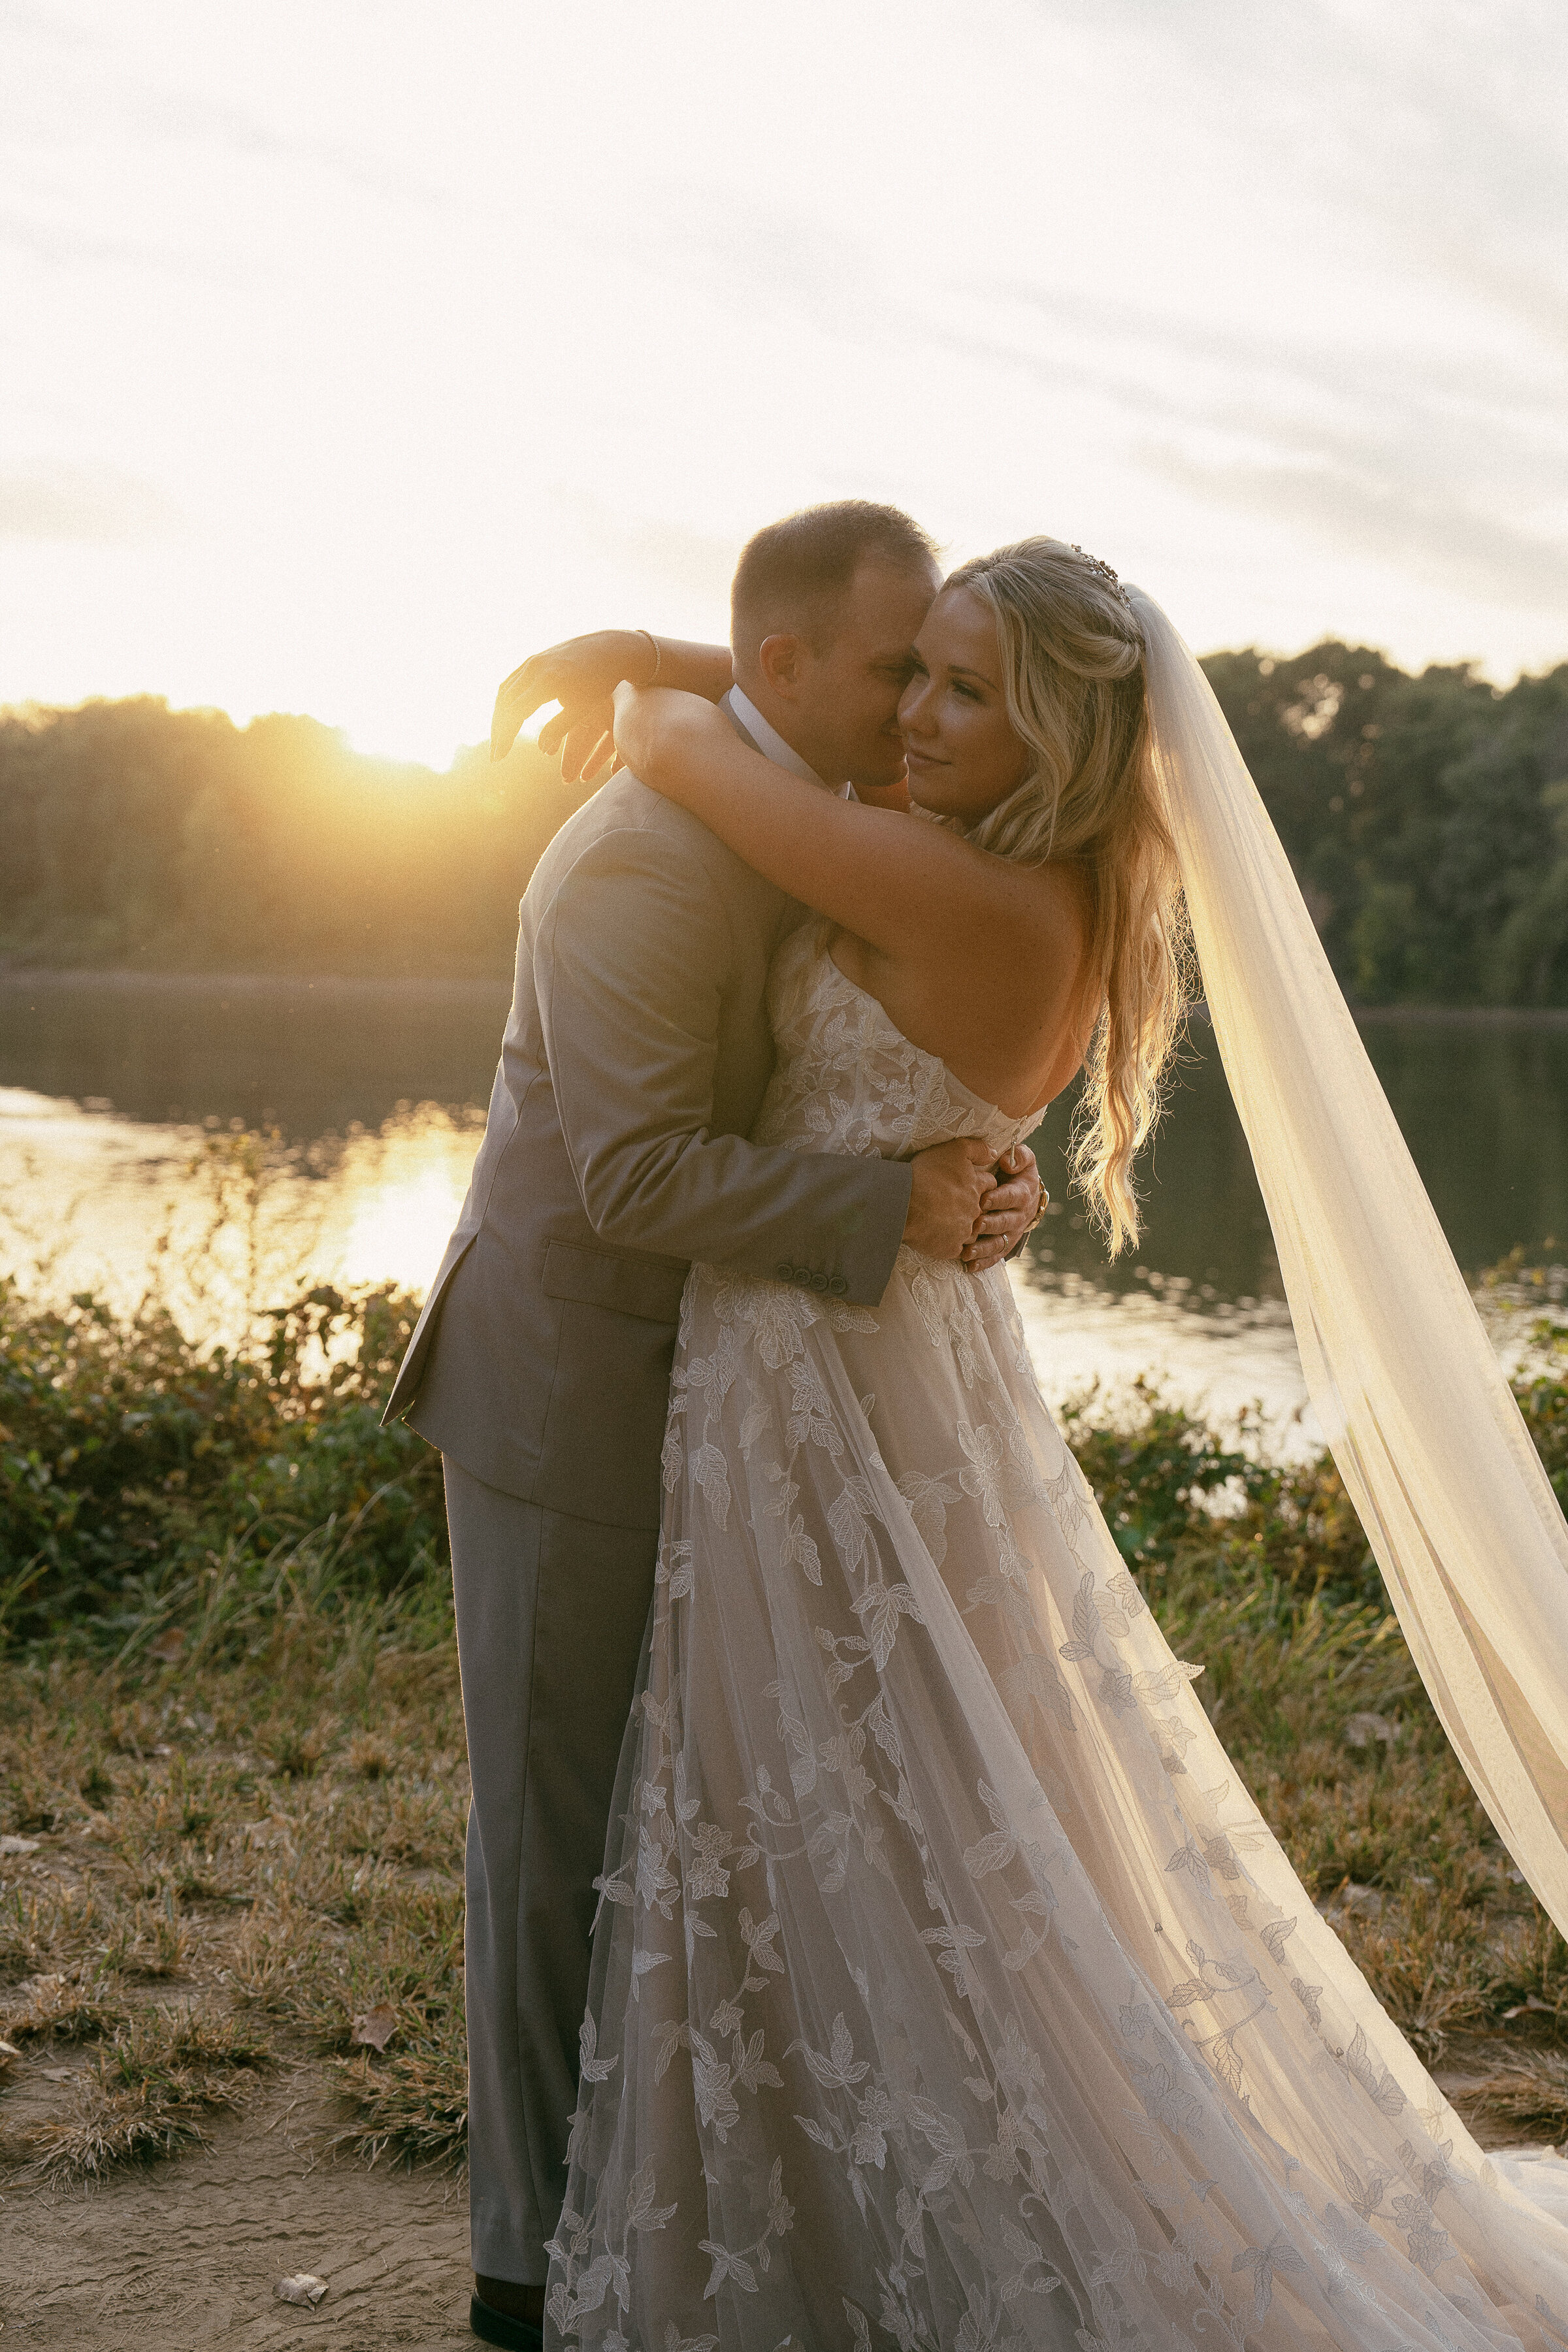 Bride and groom embracing at sunset by the river.